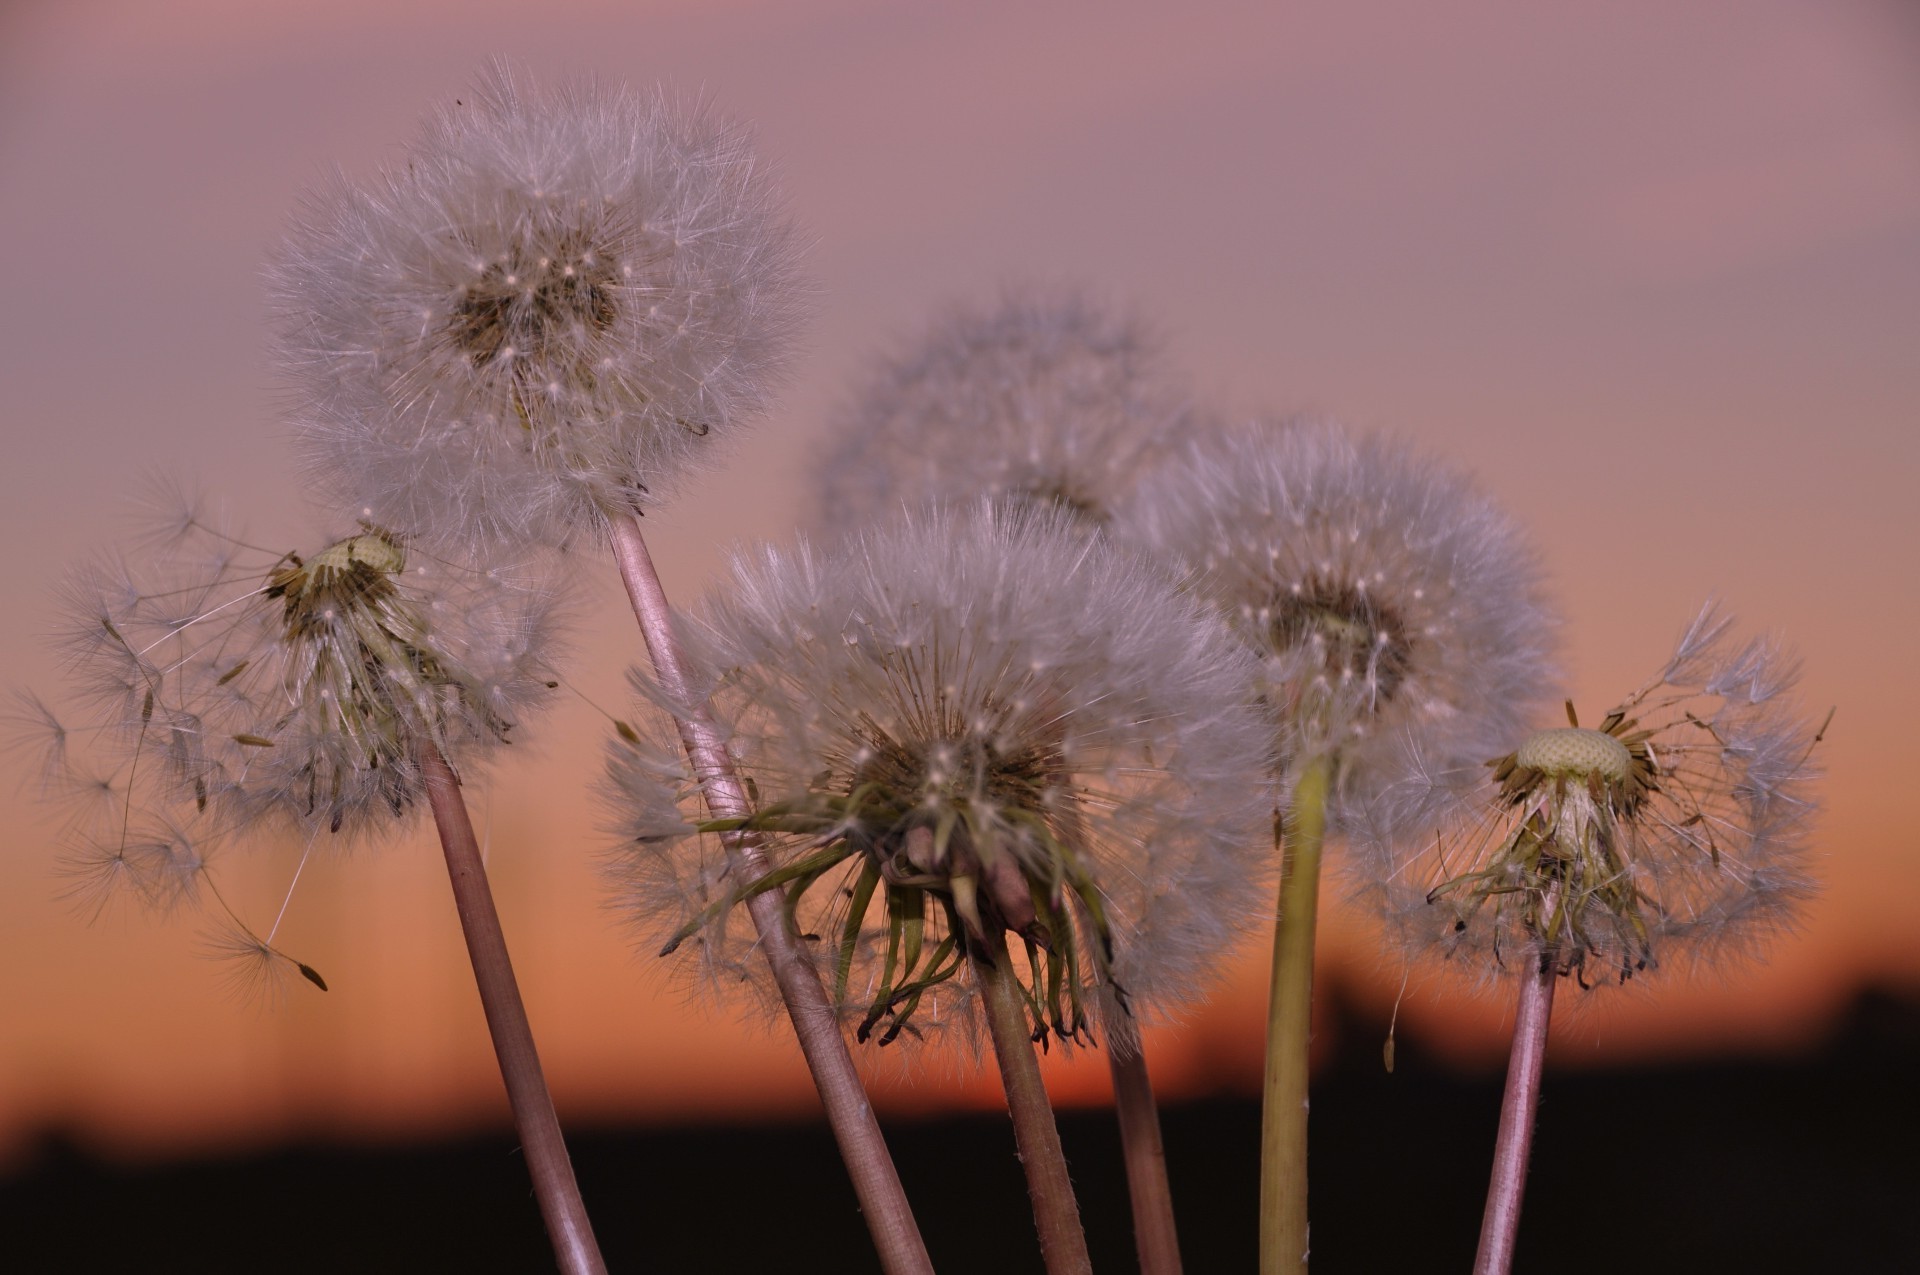 flowers flower dandelion flora nature summer seed weed grass delicate hayfield light growth husk head color garden close-up outdoors leaf